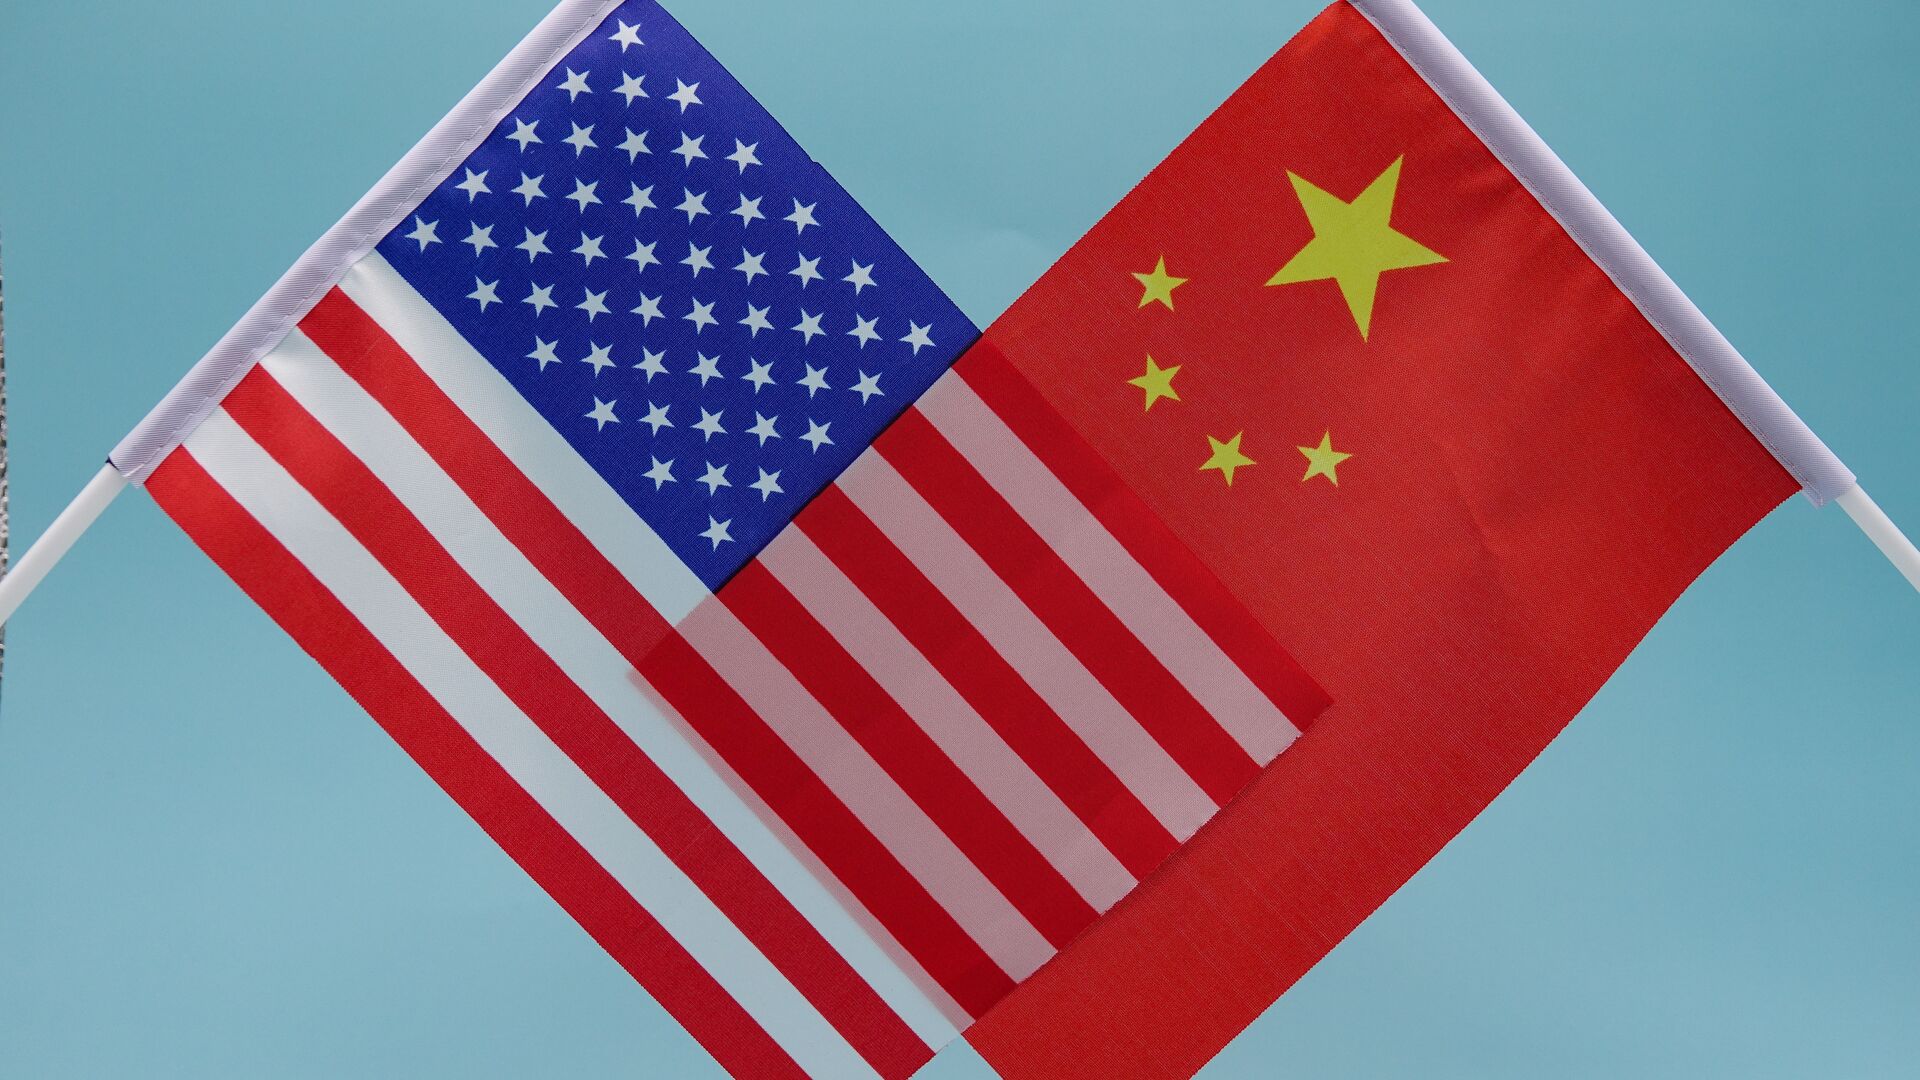 The U.S and Peoples Republic of China flags held one in front of the other against a blue backdrop, blending their colors while showing opposing sides at odds. Representative of U.S China Relations simmering.